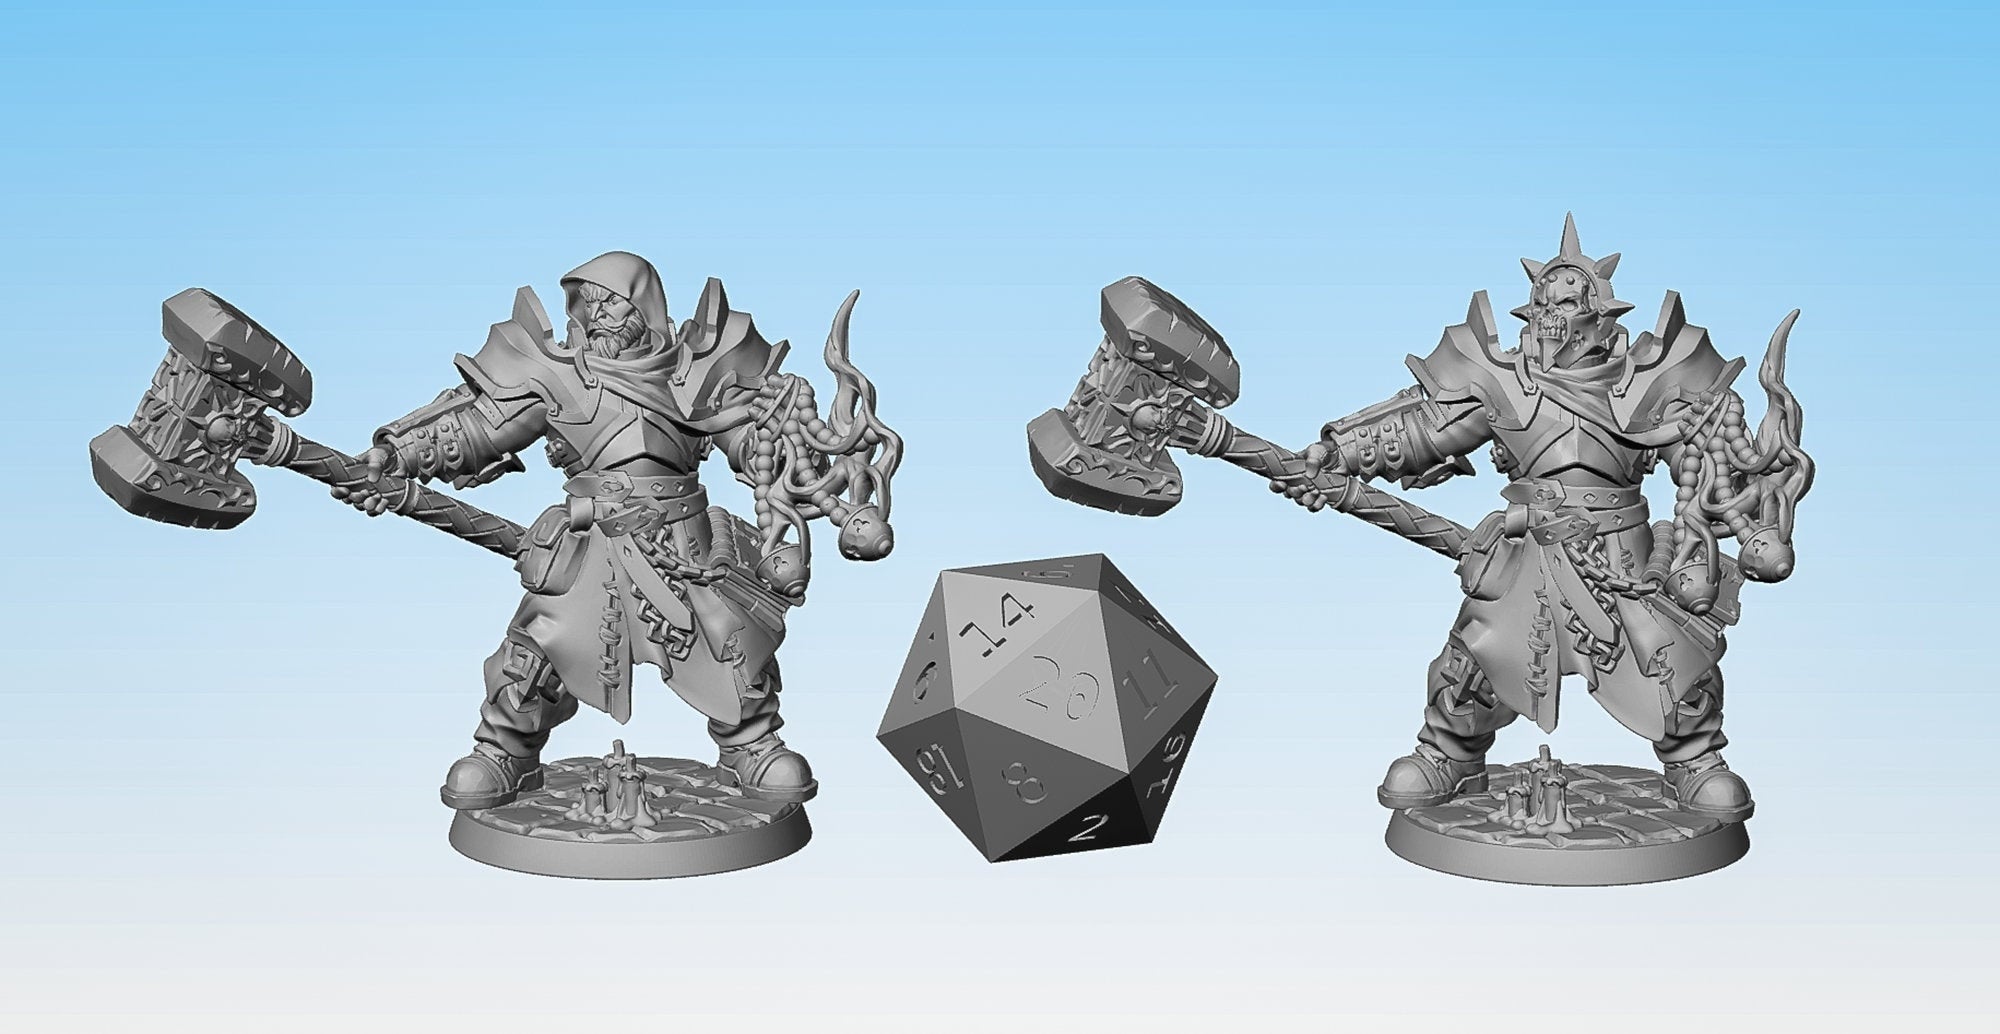 TEMPLAR PALADIN (A) "Hammer & Incense" (m) (2 Versions)-Role Playing Miniatures